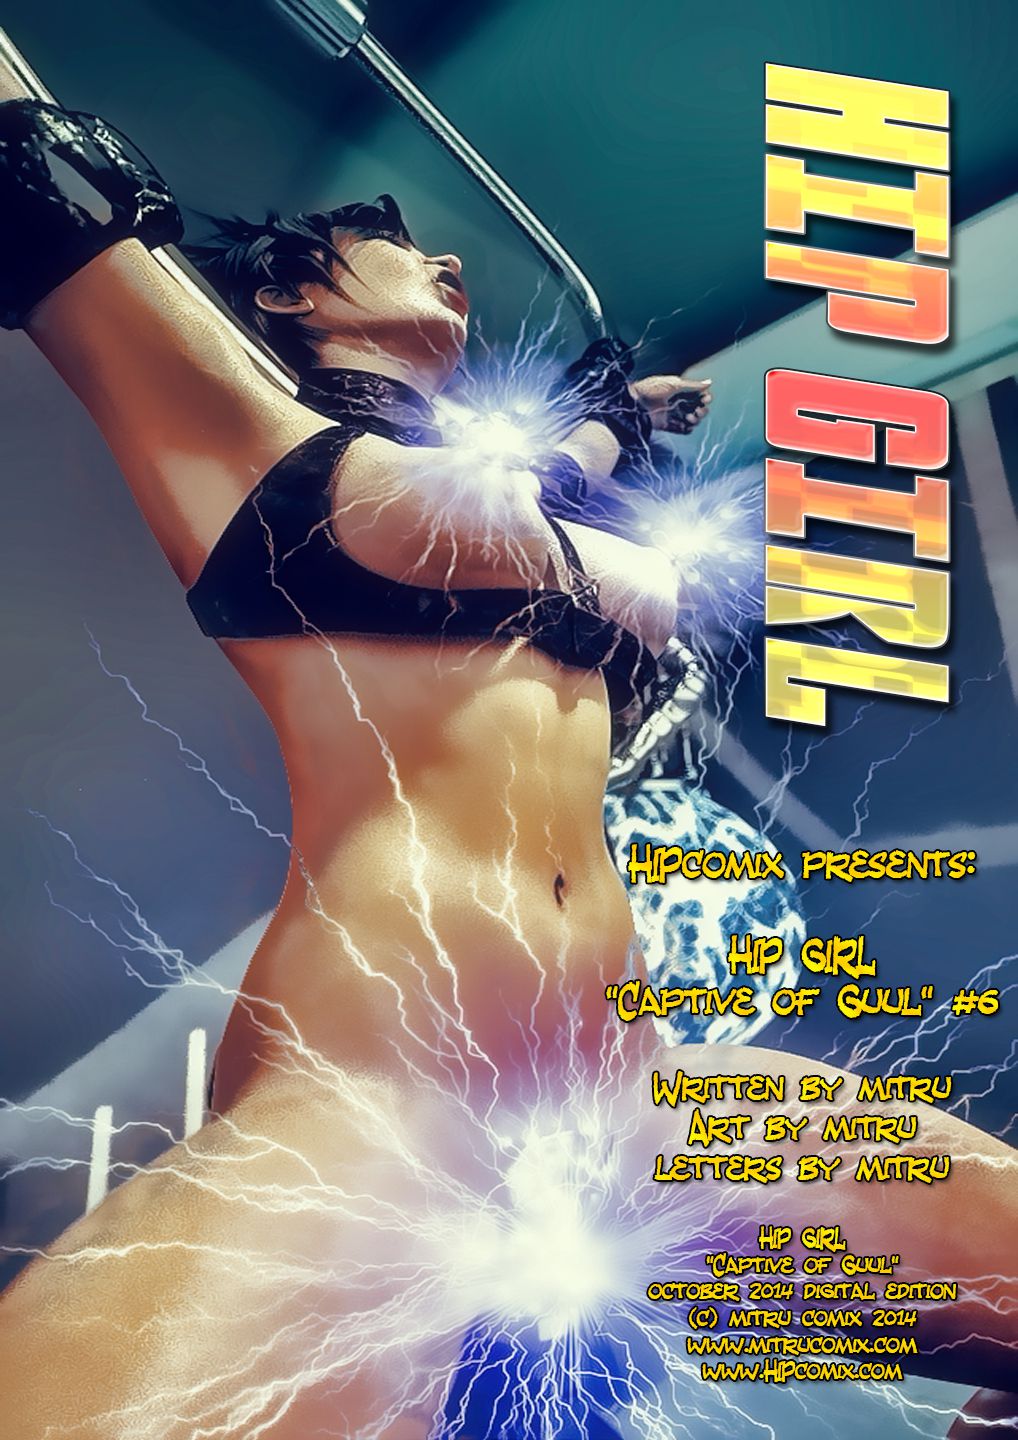 Hip Girl - Captive of Guul 1-8 (ongoing) 85